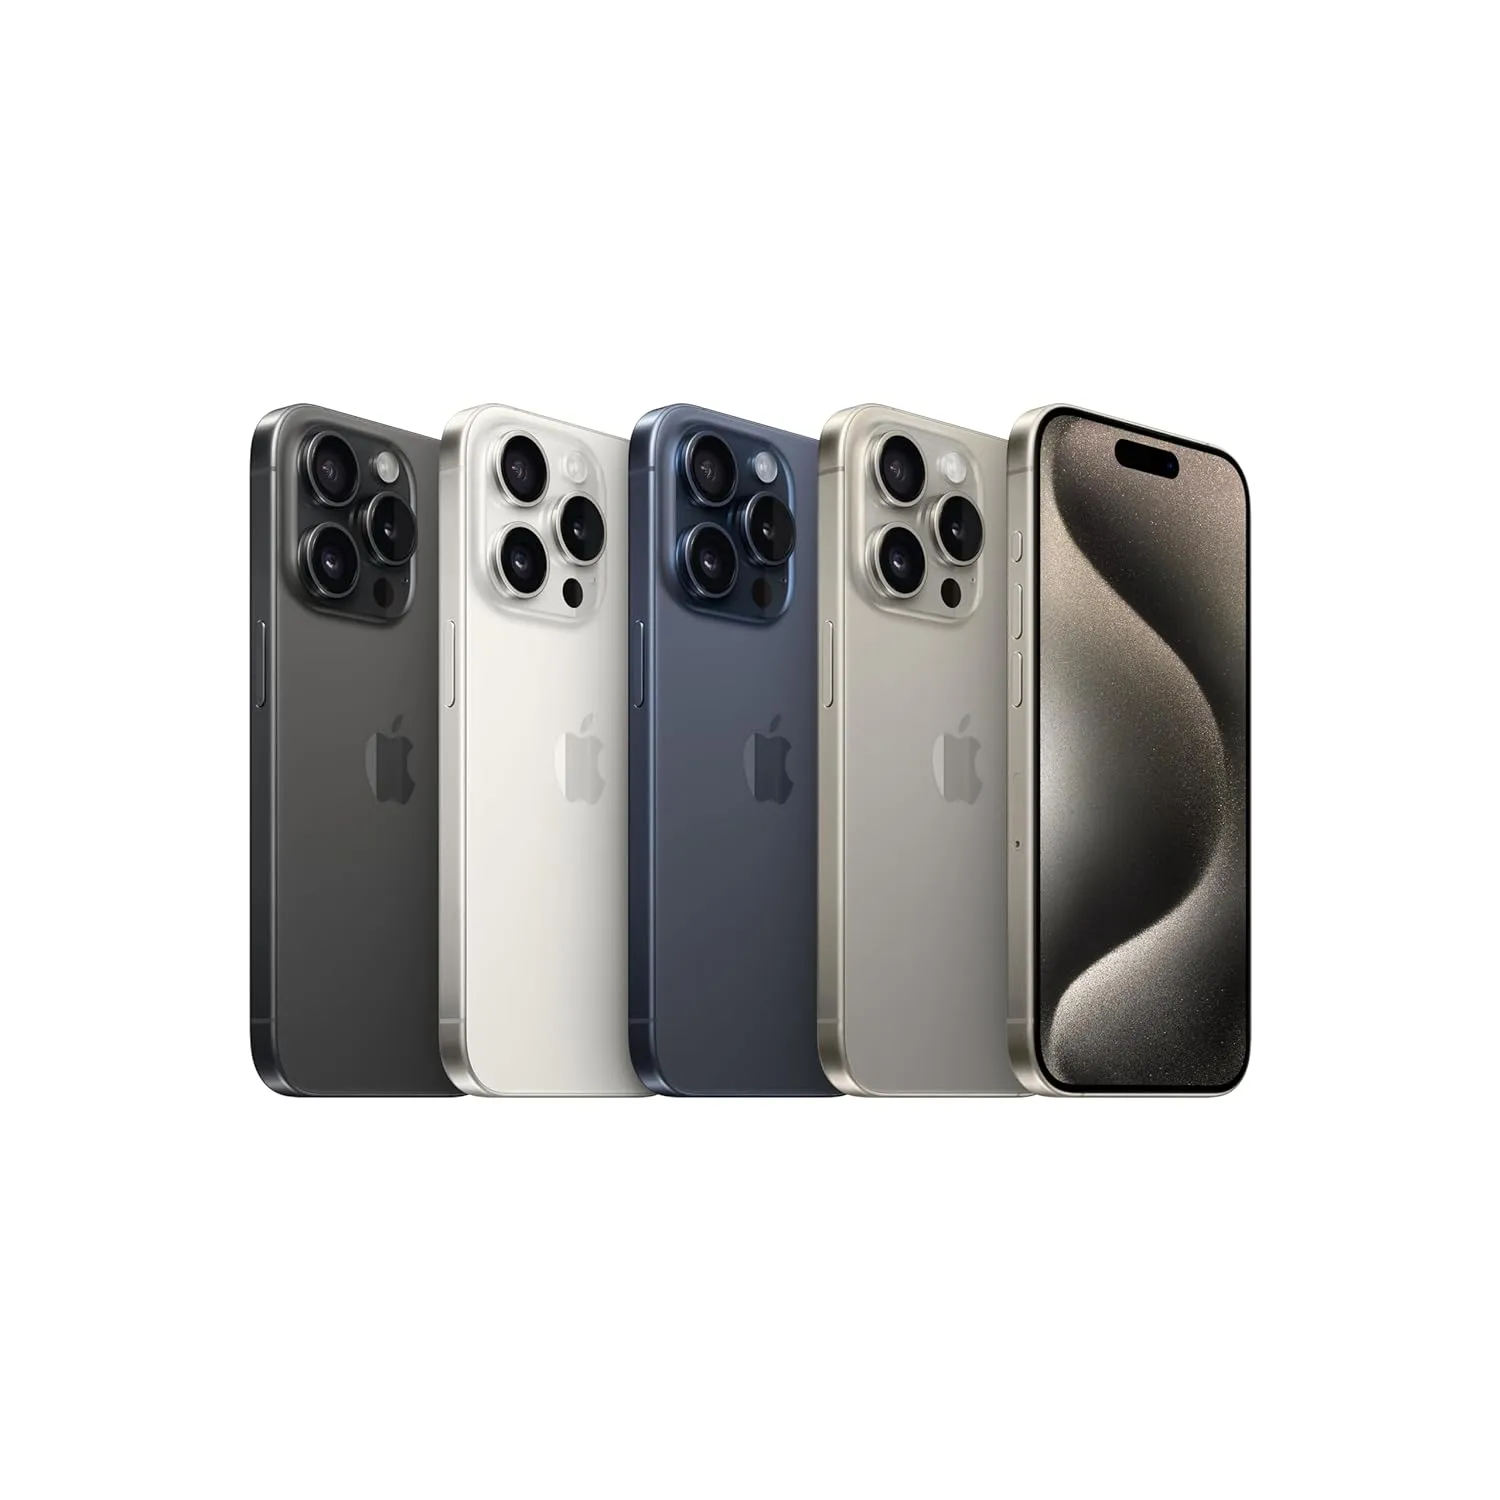 Apple iPhone 15 Pro (128 GB) Black Titanium Reviews | Price, Specification, Colours and Other Details